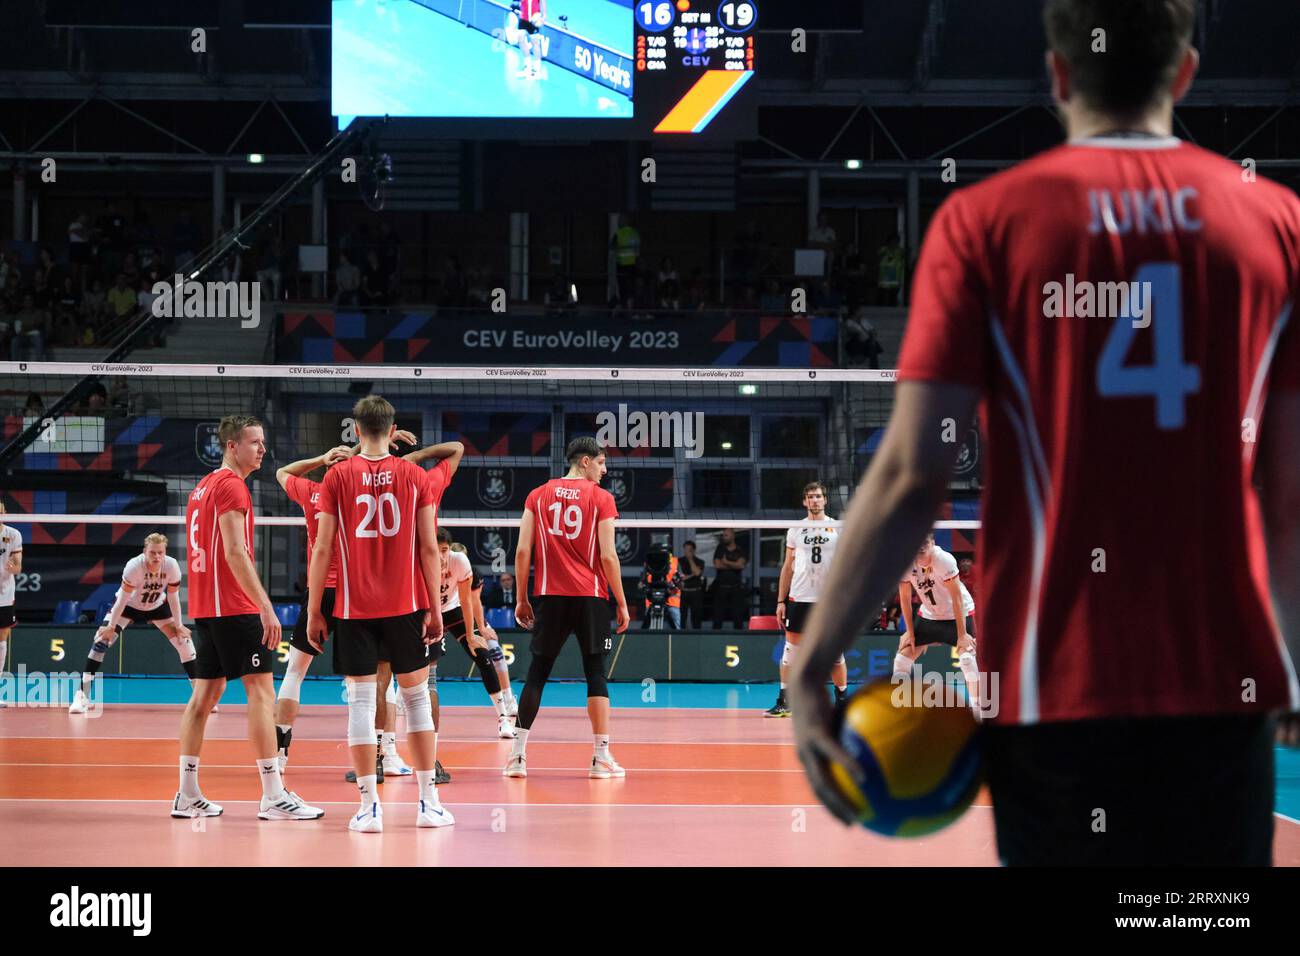 Switzerland national team seen during the Final Round Day 8 of the Men’s CEV Eurovolley 2023 between Switzerland vs Belgium. Belgium national team beats Switzerland with a score 3-0 Stock Photo